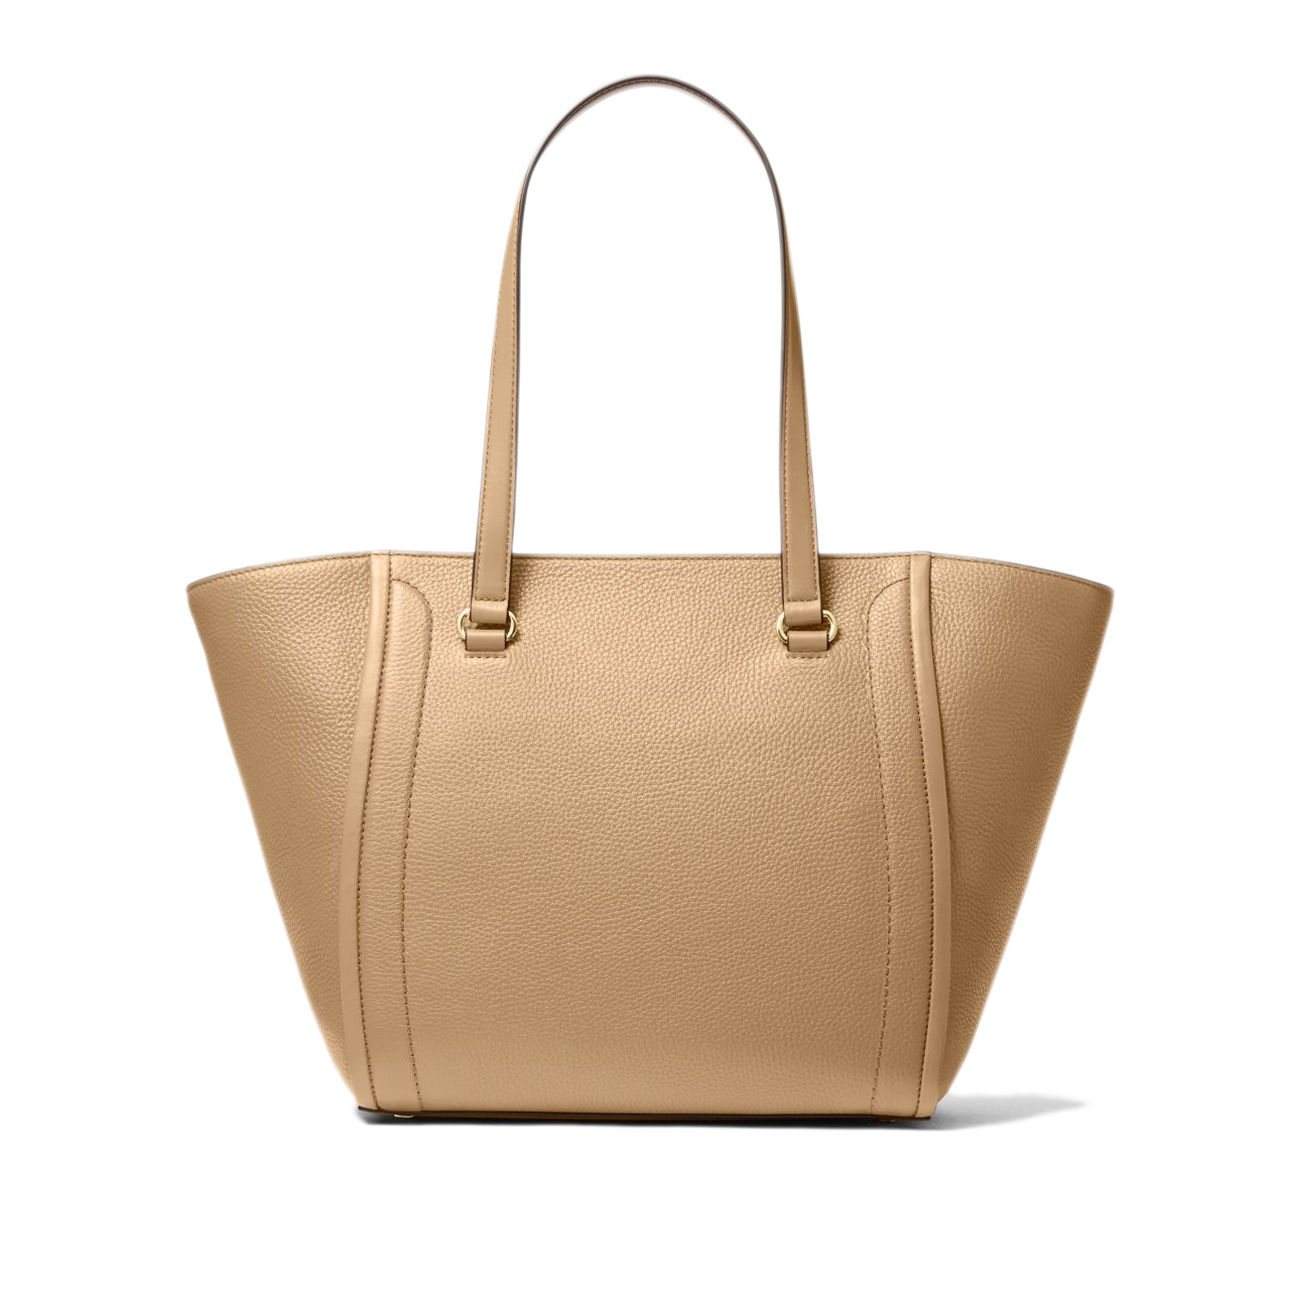 MICHAEL KORS TOTE BAG IN HAMMERED LEATHER Woman Leather